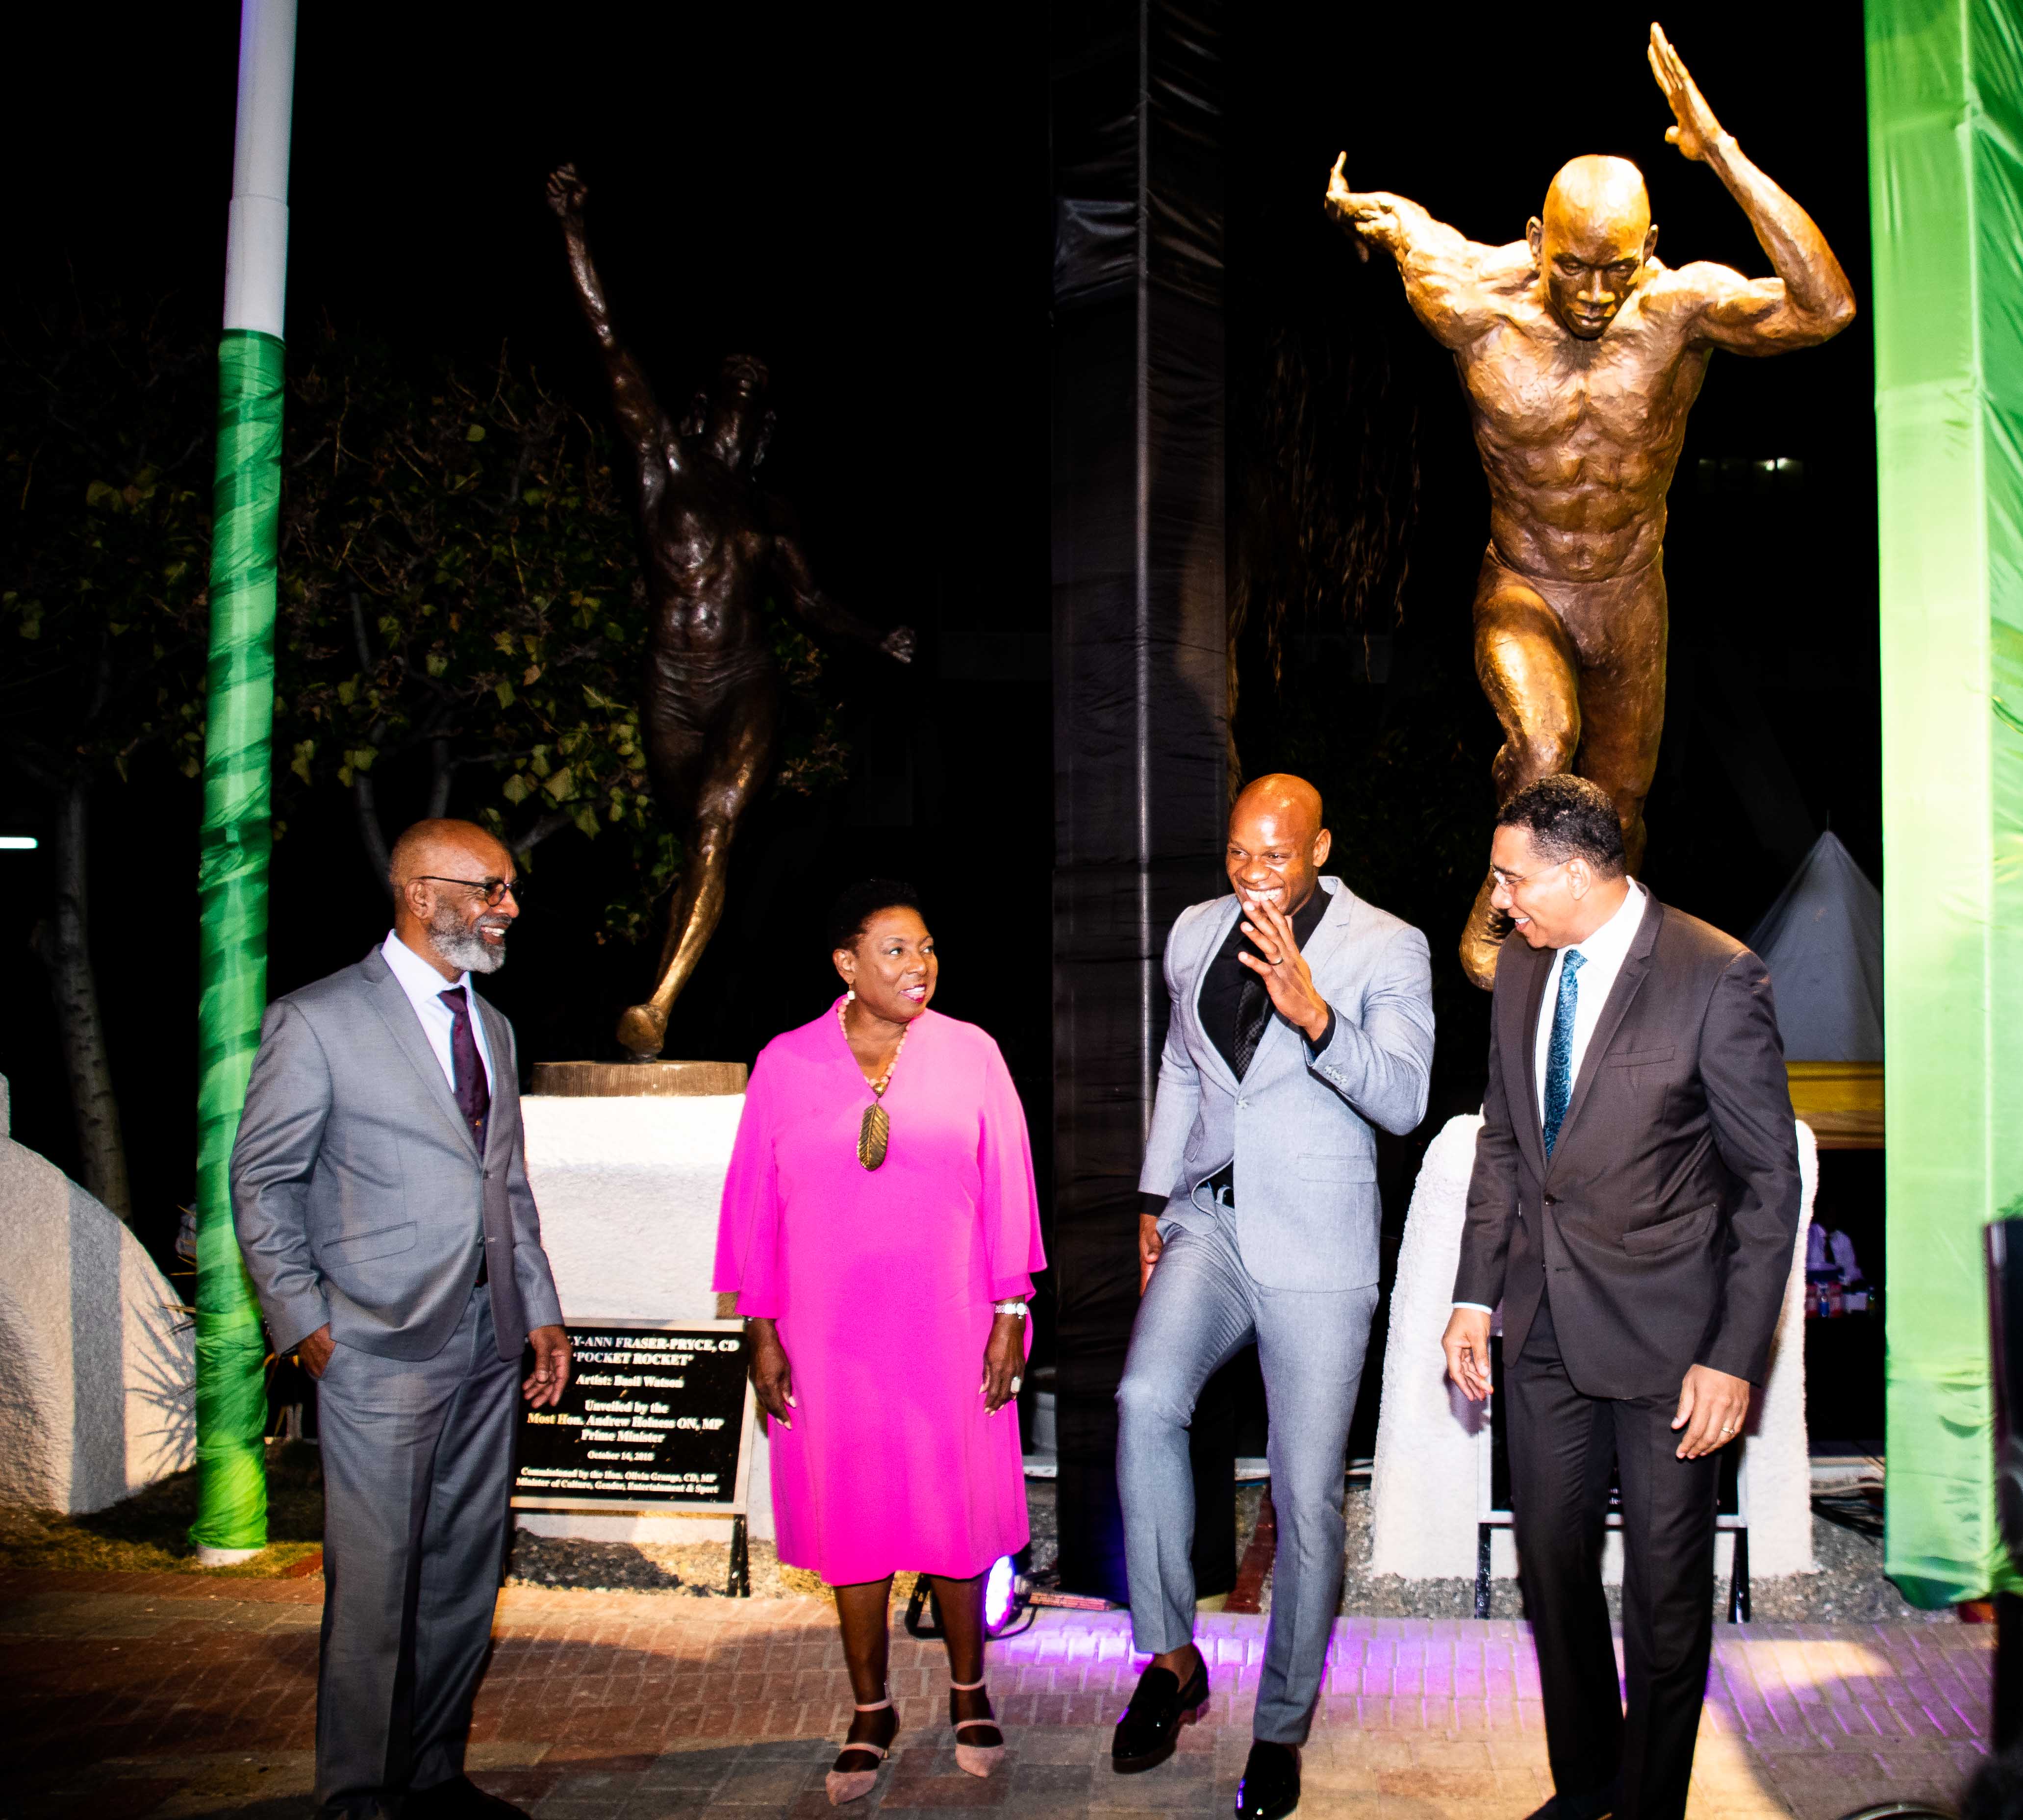 Asafa Powell statue unveil at the National Stadium in Kingston